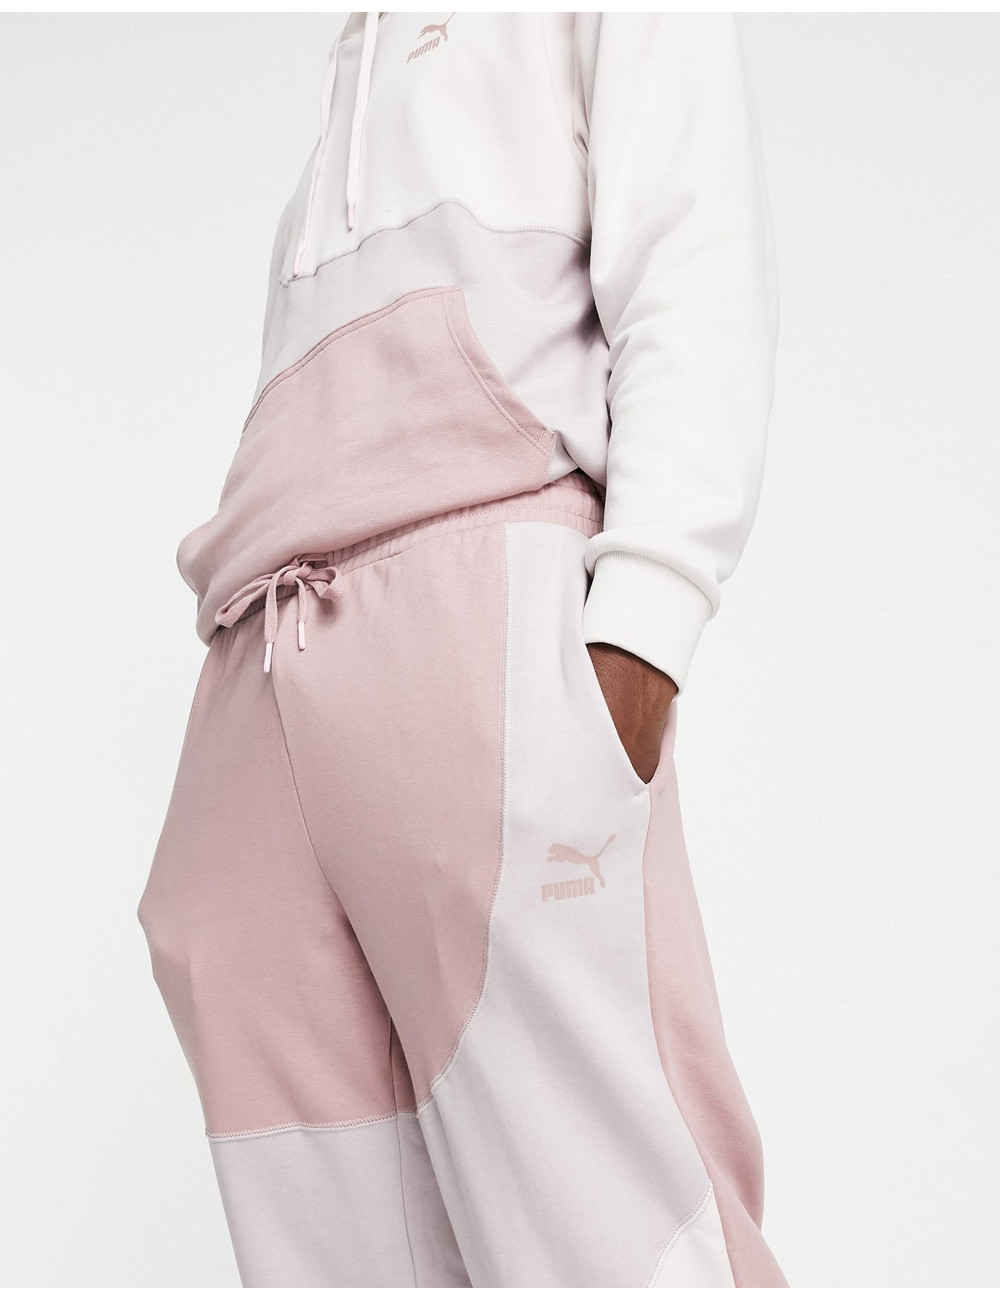 Puma convey joggers in pink...